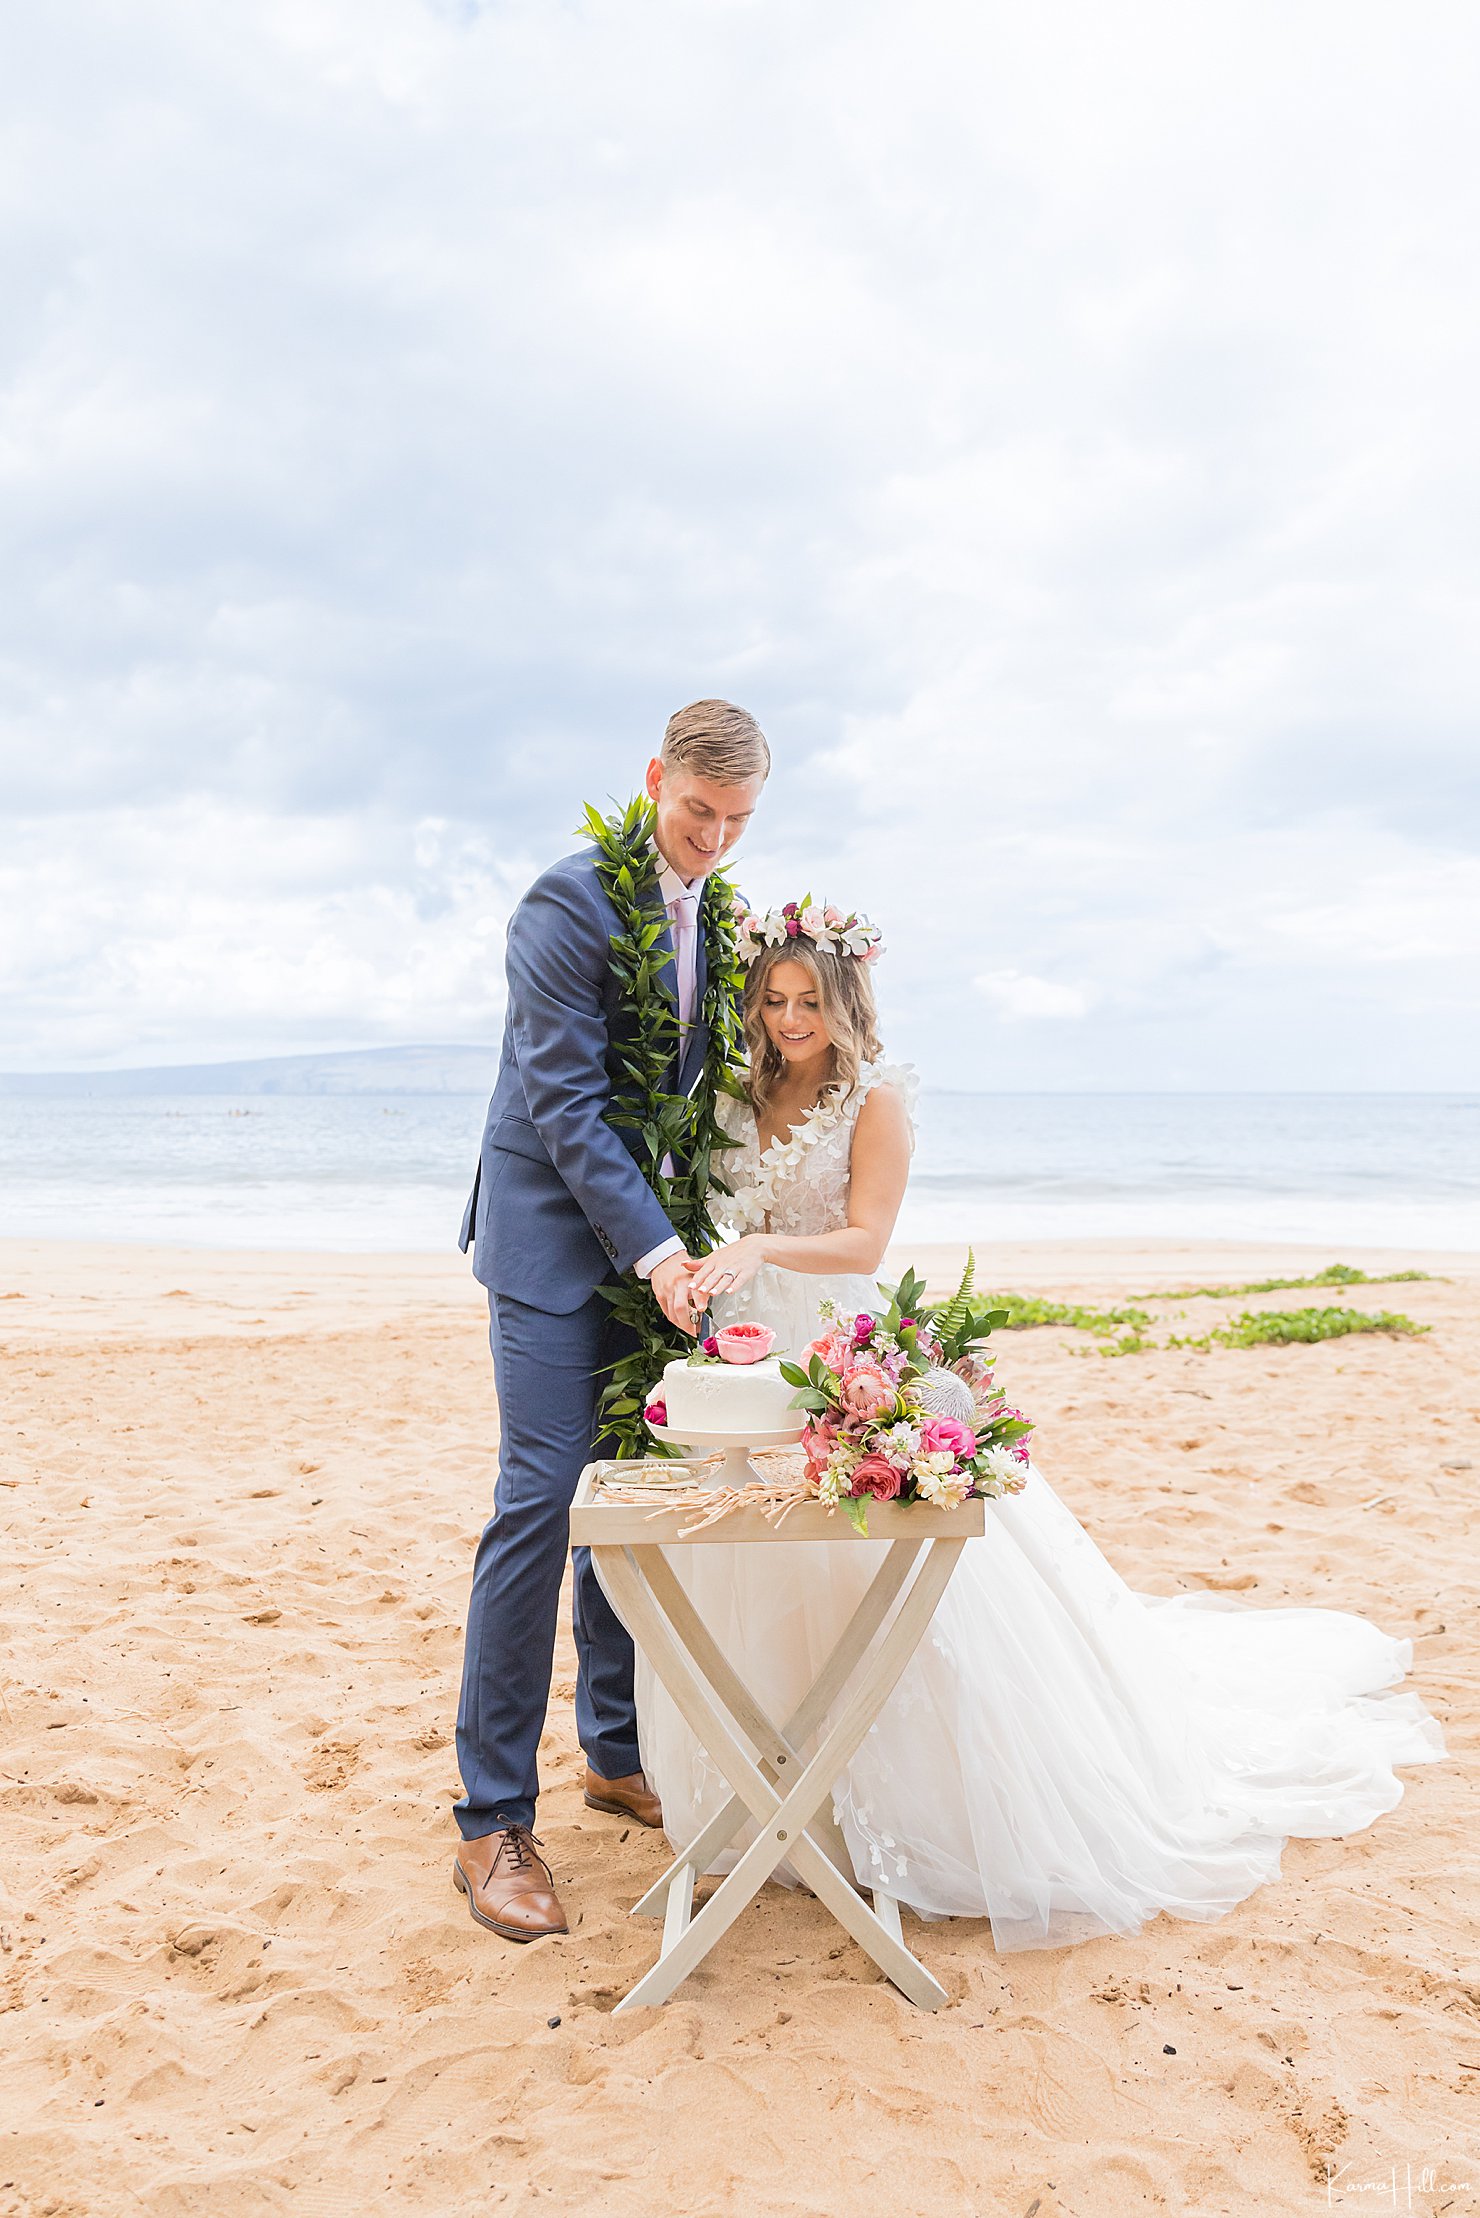 Elope in Maui with cake cutting